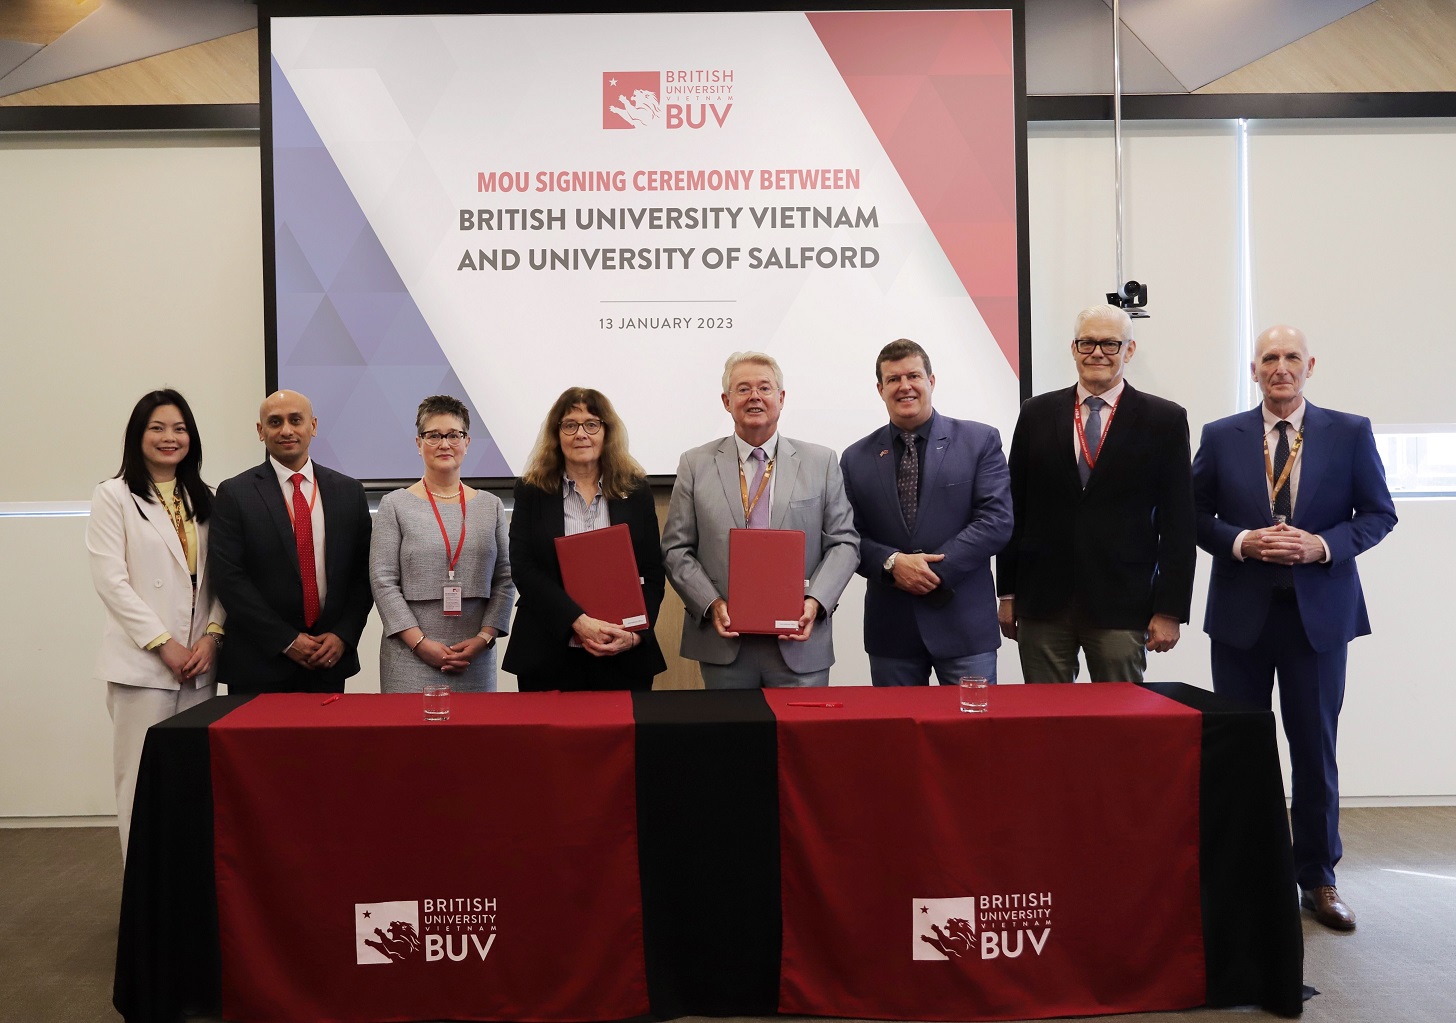 University of Salford agrees an institutional partnership with British University Vietnam.